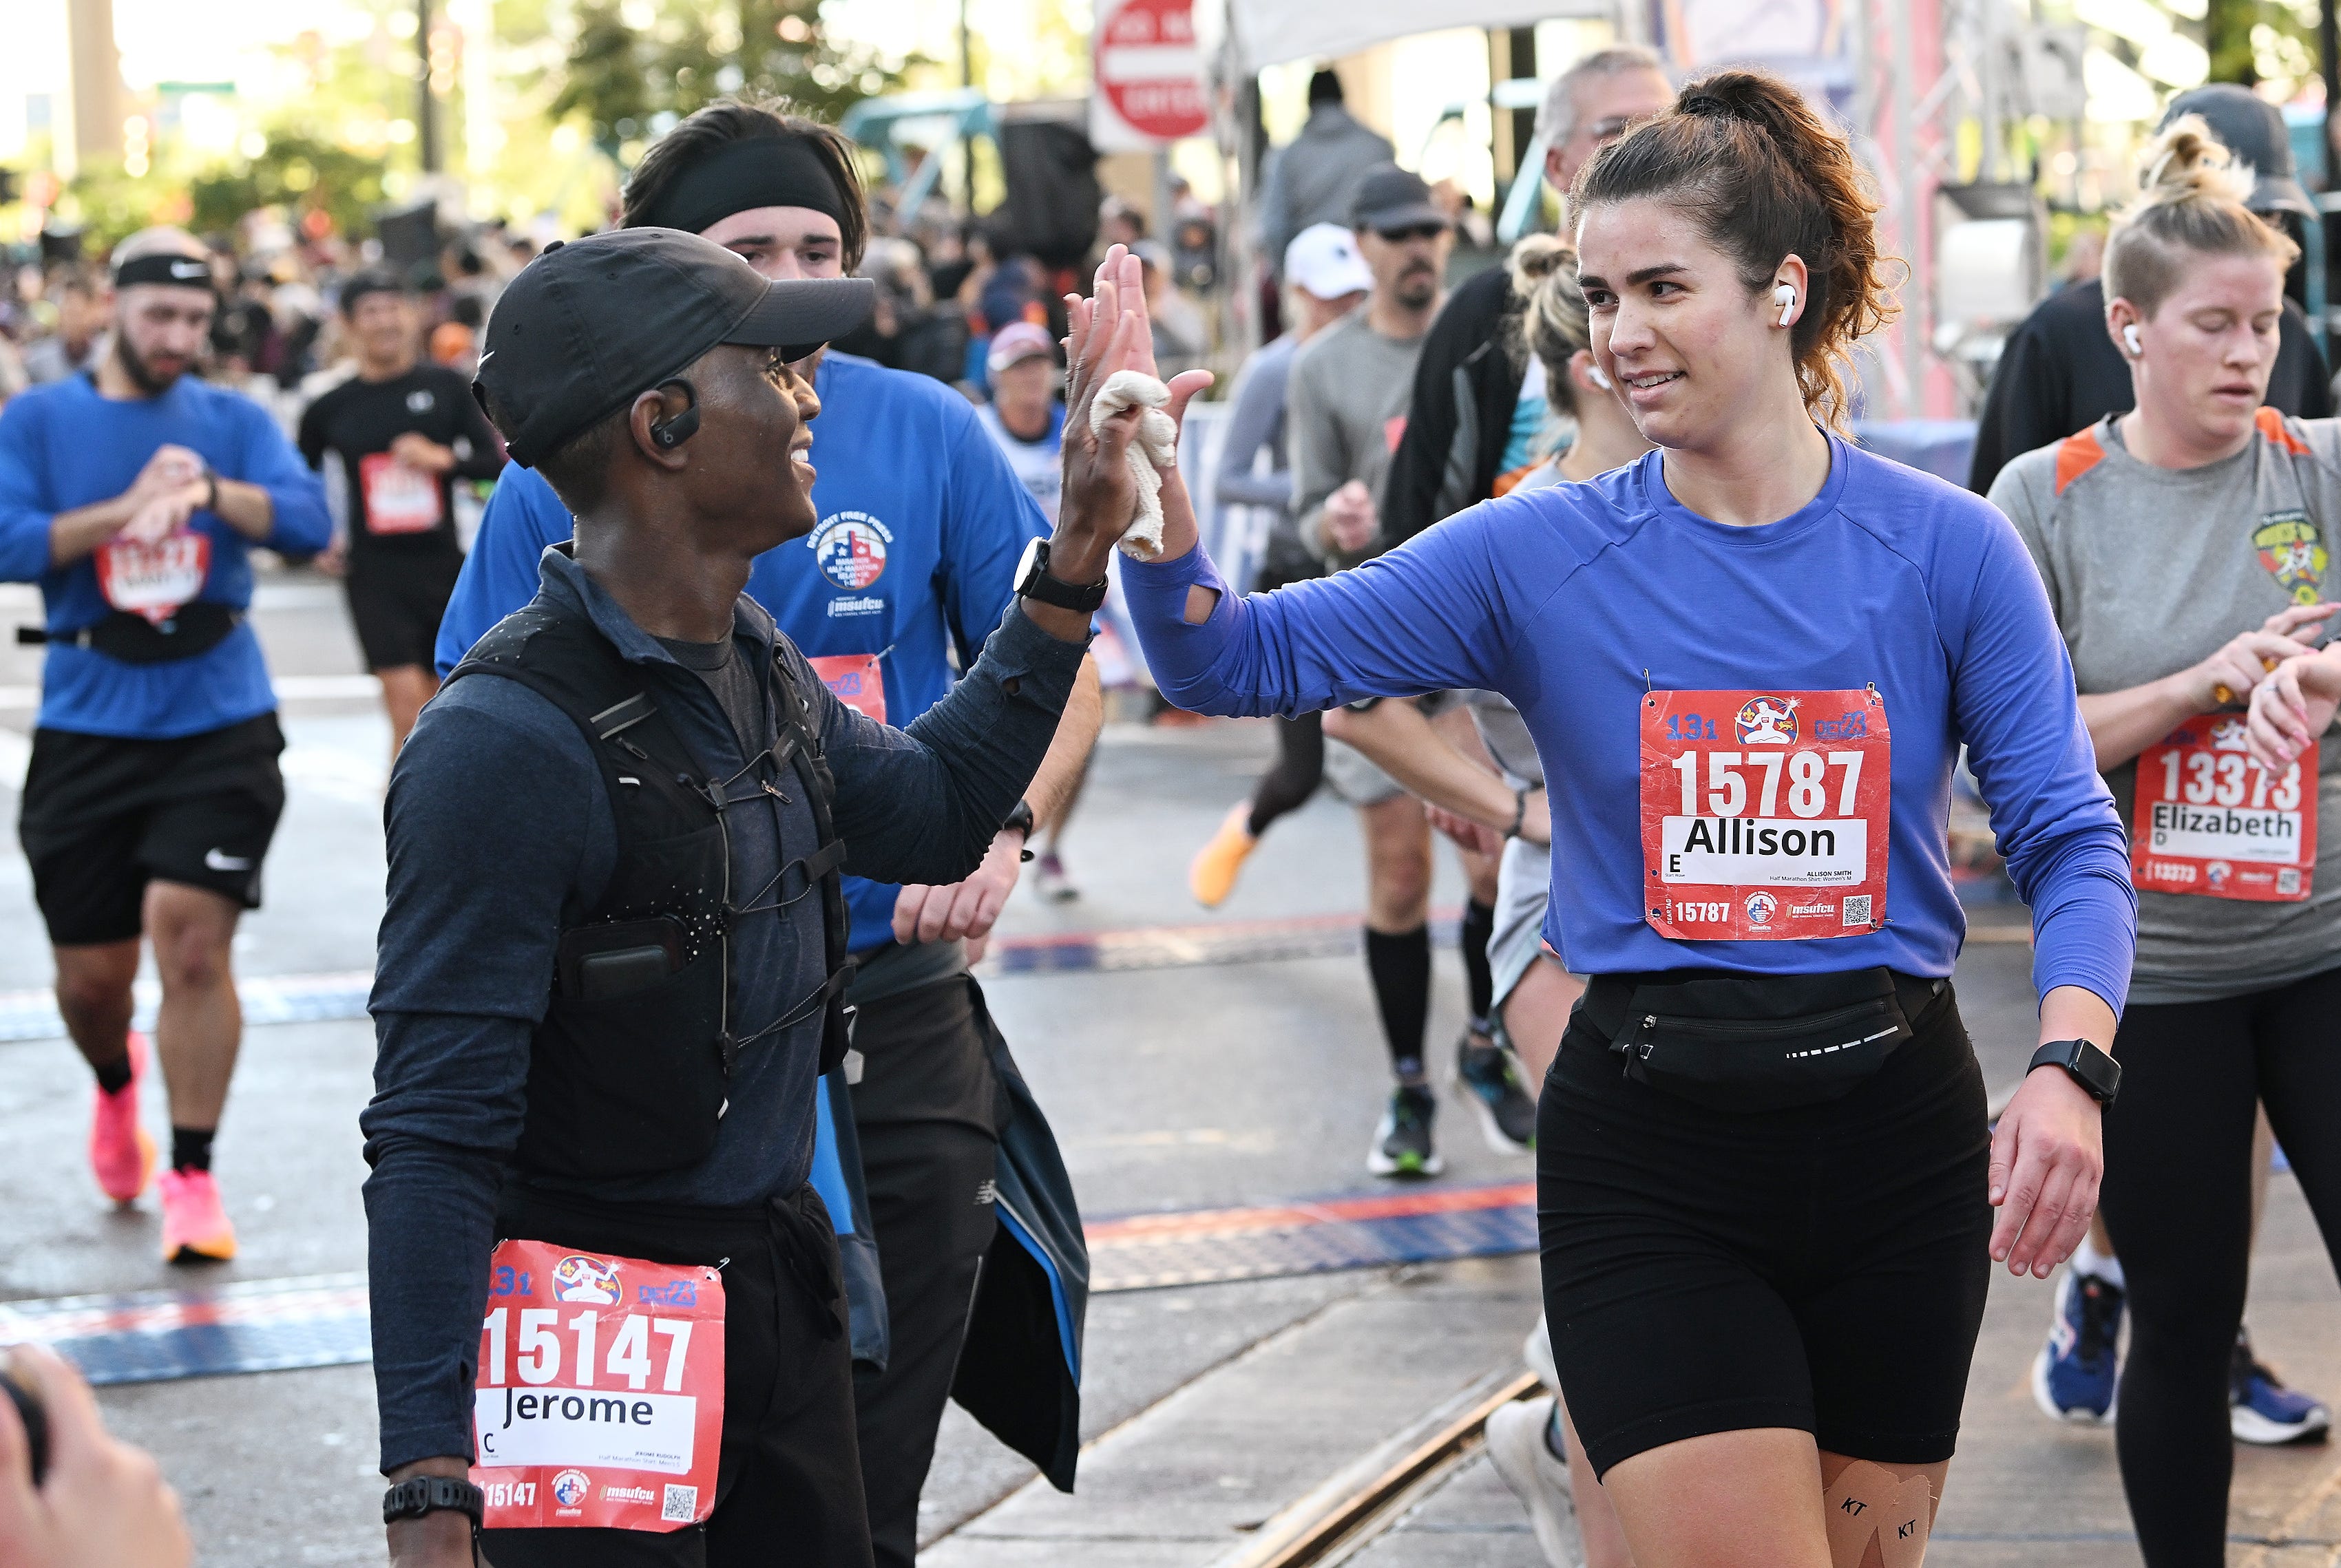 From left, Jerome Rudolph, 23, of Detroit and Allison Smith, 23, of Swartz Creek react as they finish the half marathon.